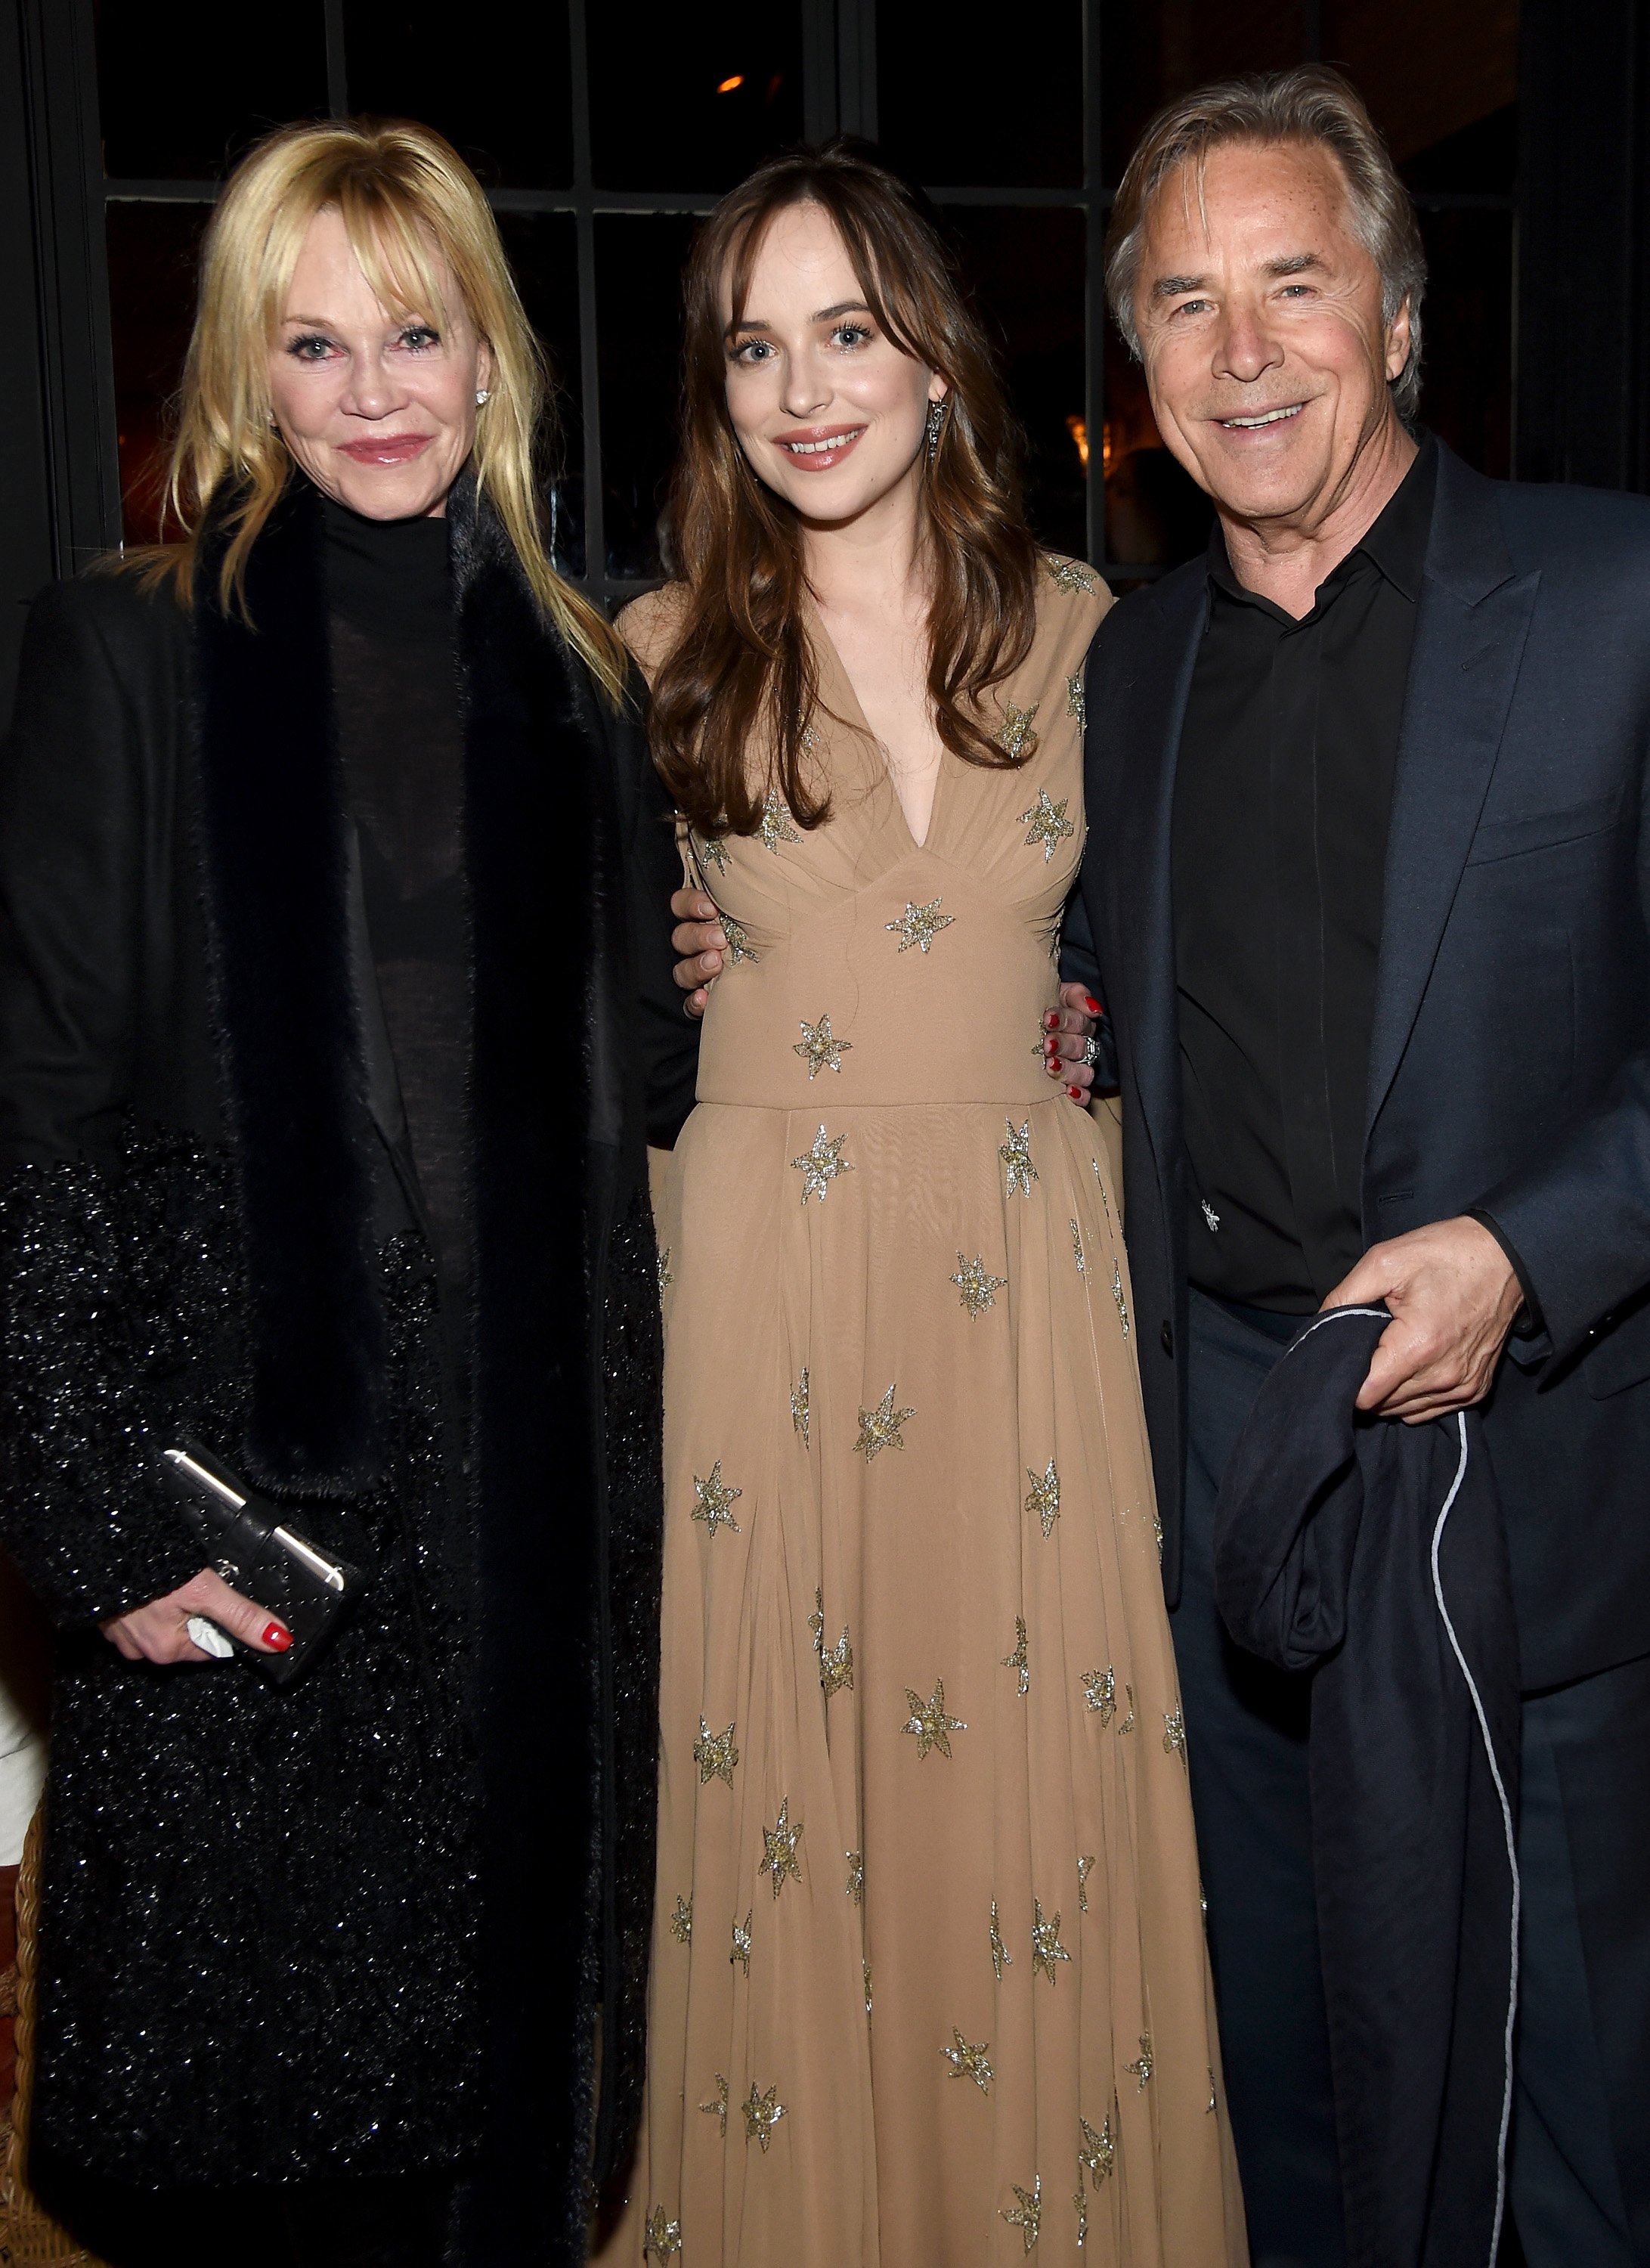 Melanie Griffith, Dakota Johnson, and Don Johnson attend an after party in New York City on February 3, 2016 | Photo: Getty Images